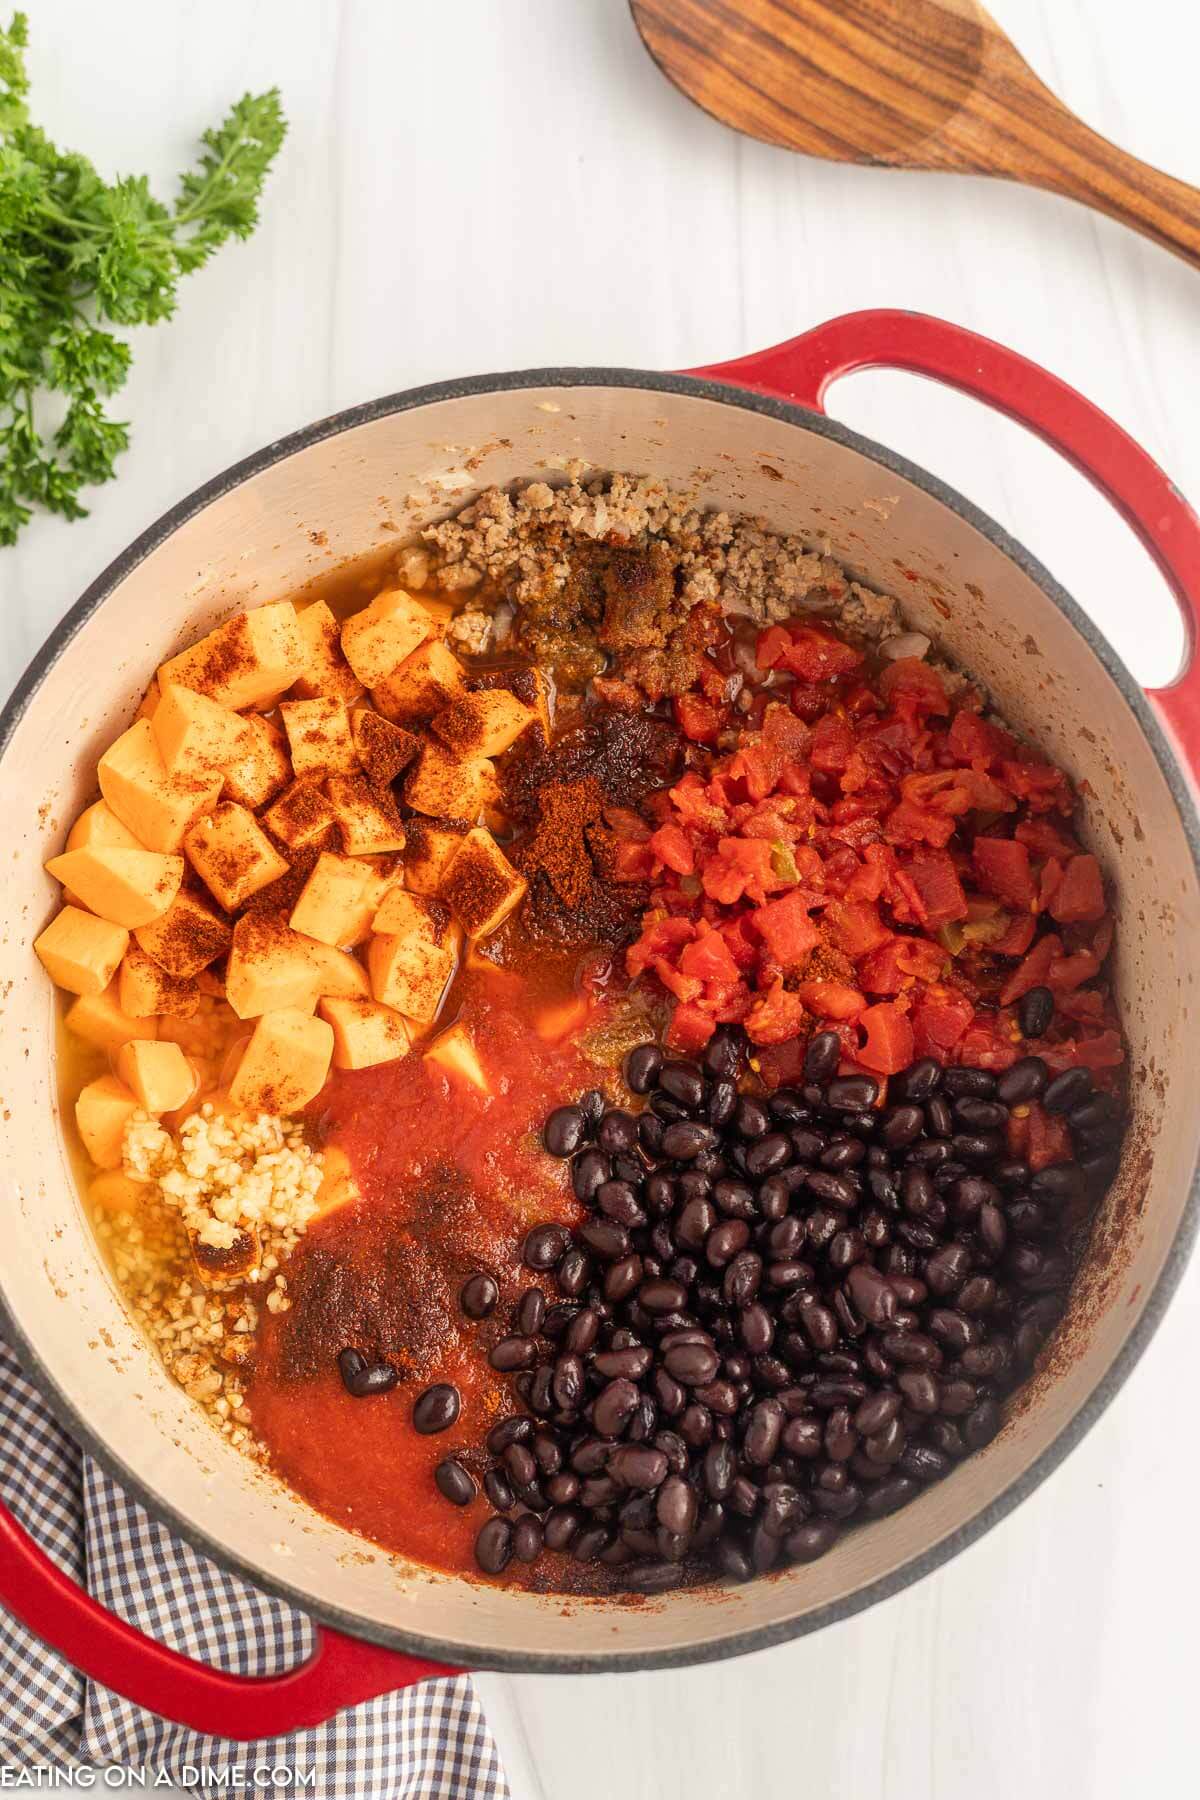 Adding the ingredients to a large pot